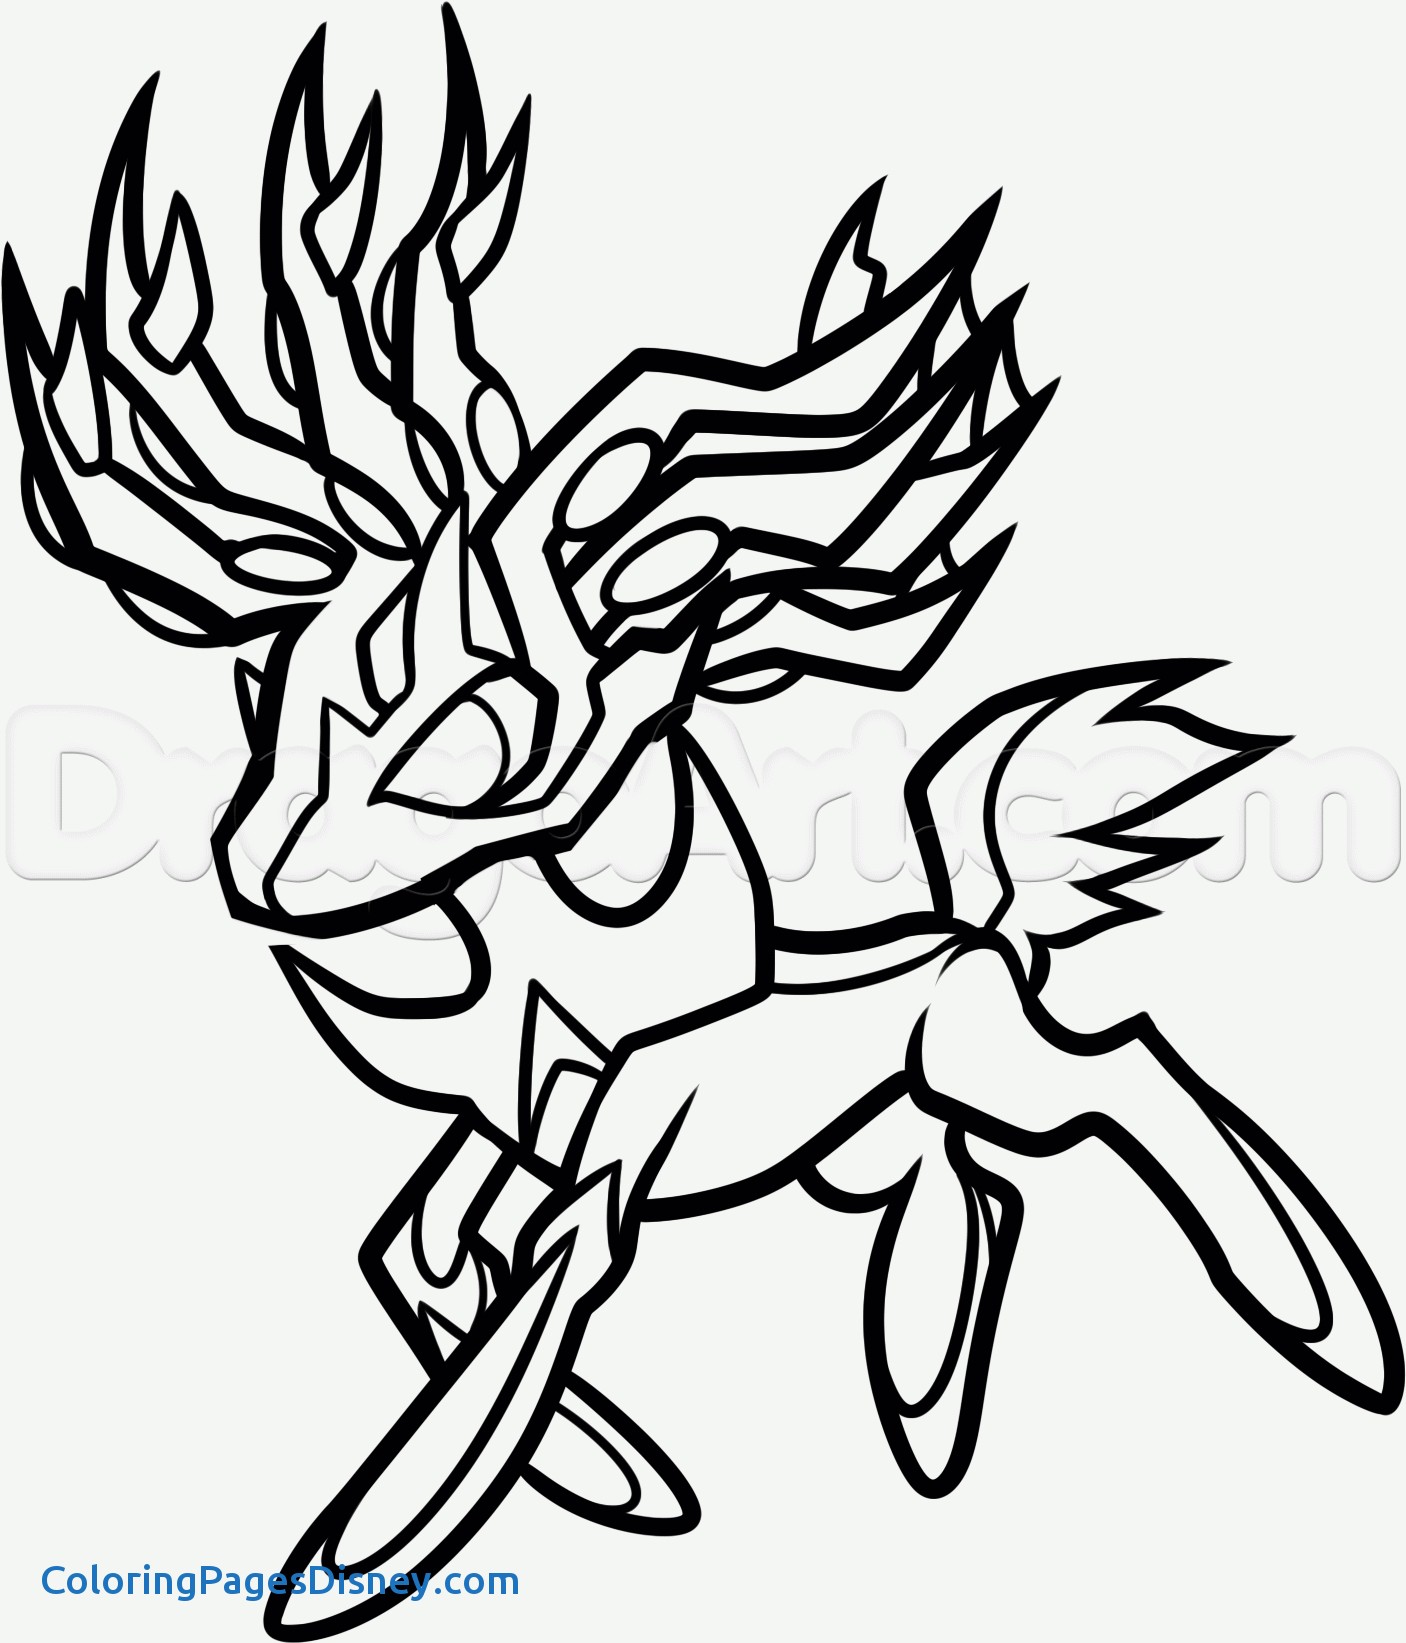 Xerneas Coloring Pages at GetColorings.com | Free printable colorings